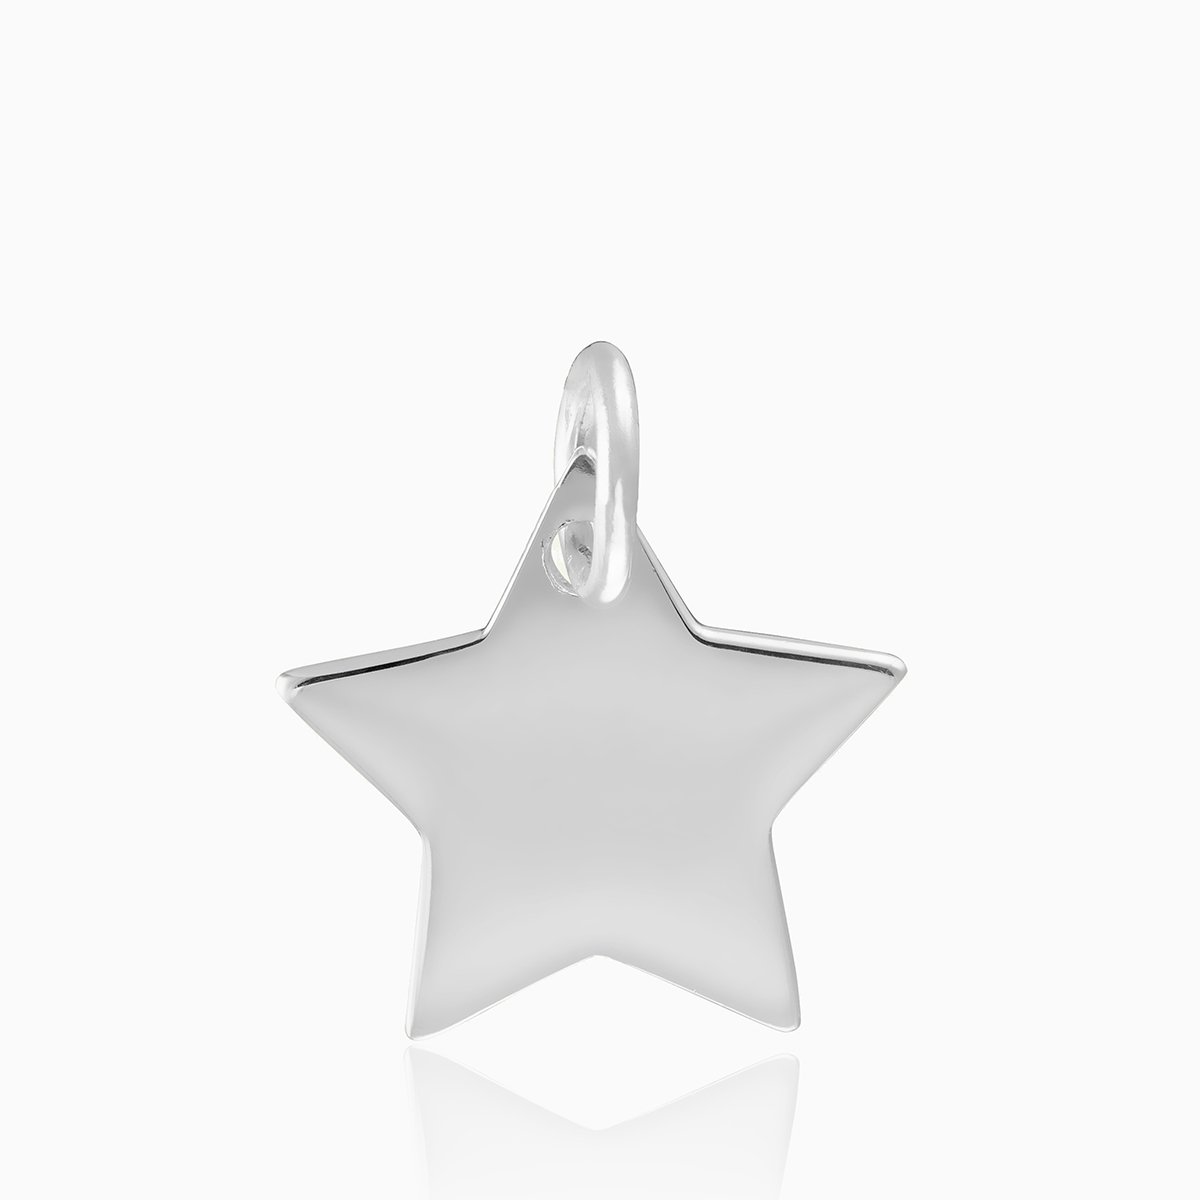 Product title: Star Charm, product type: Charm